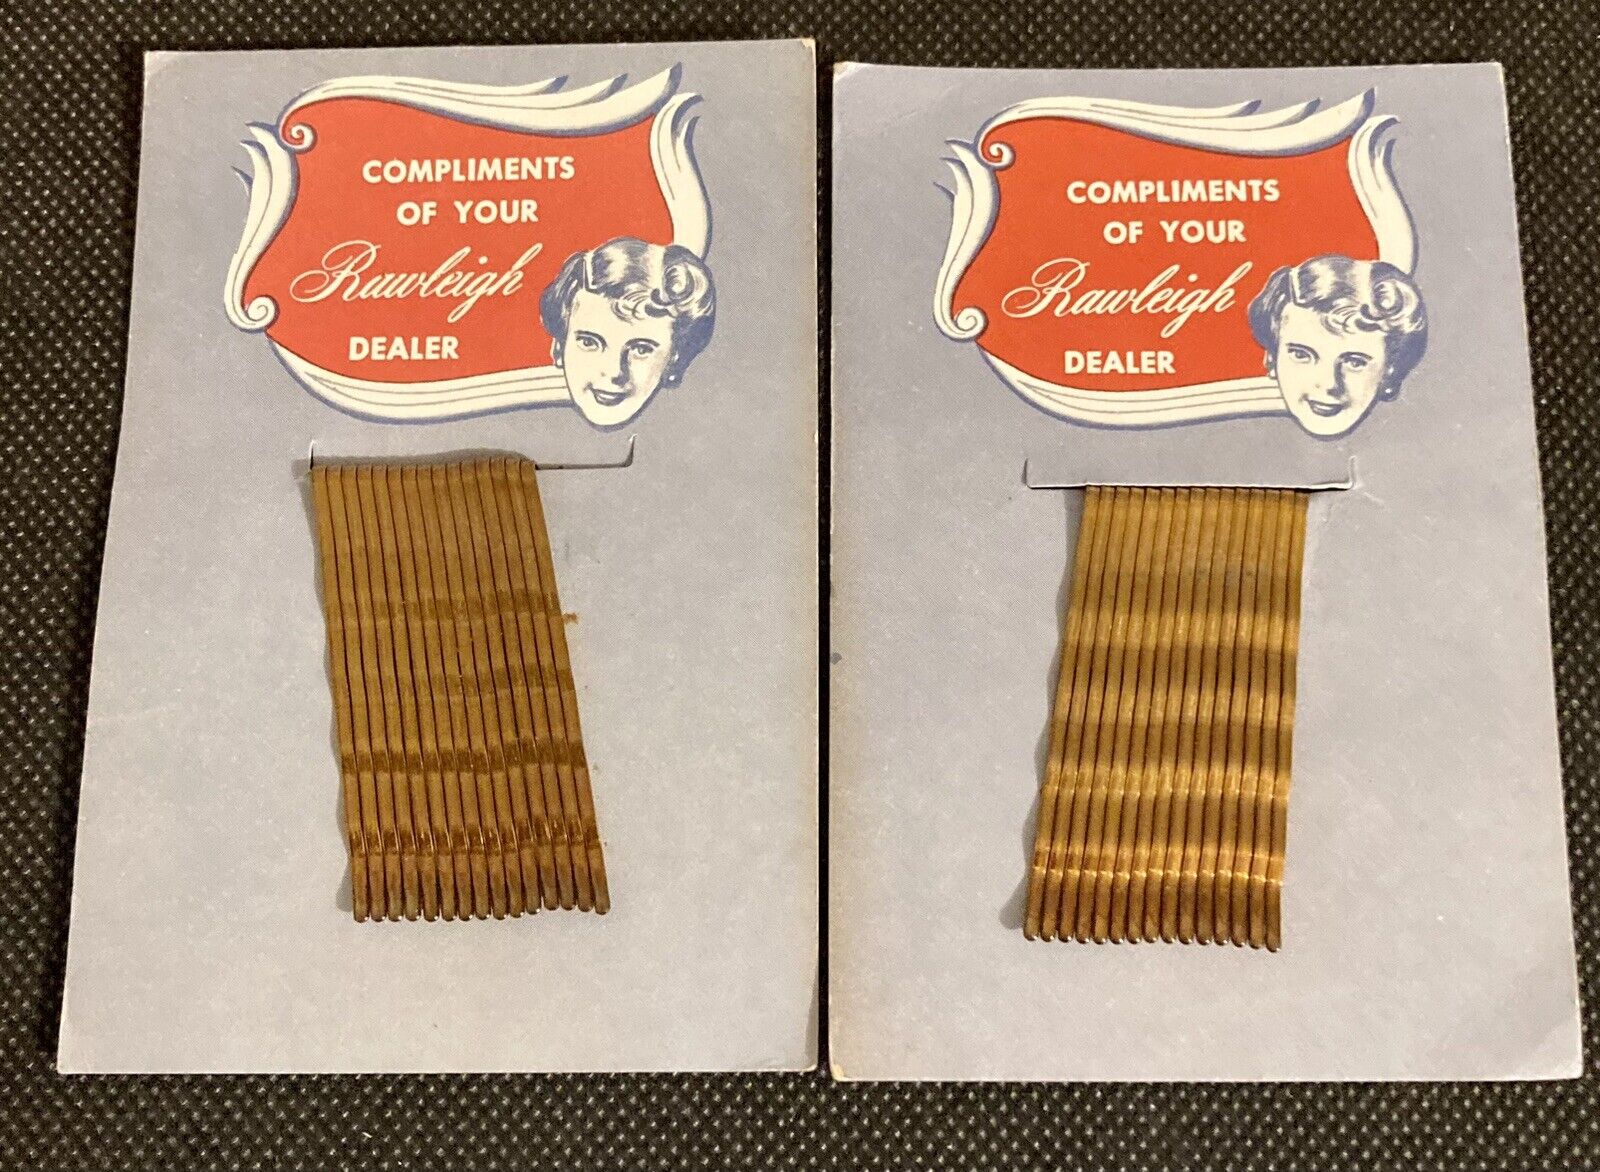 Vintage 1950's Compliments of Your Rawleigh Dealer Bobby Pins Lot of 2 Packs NOS